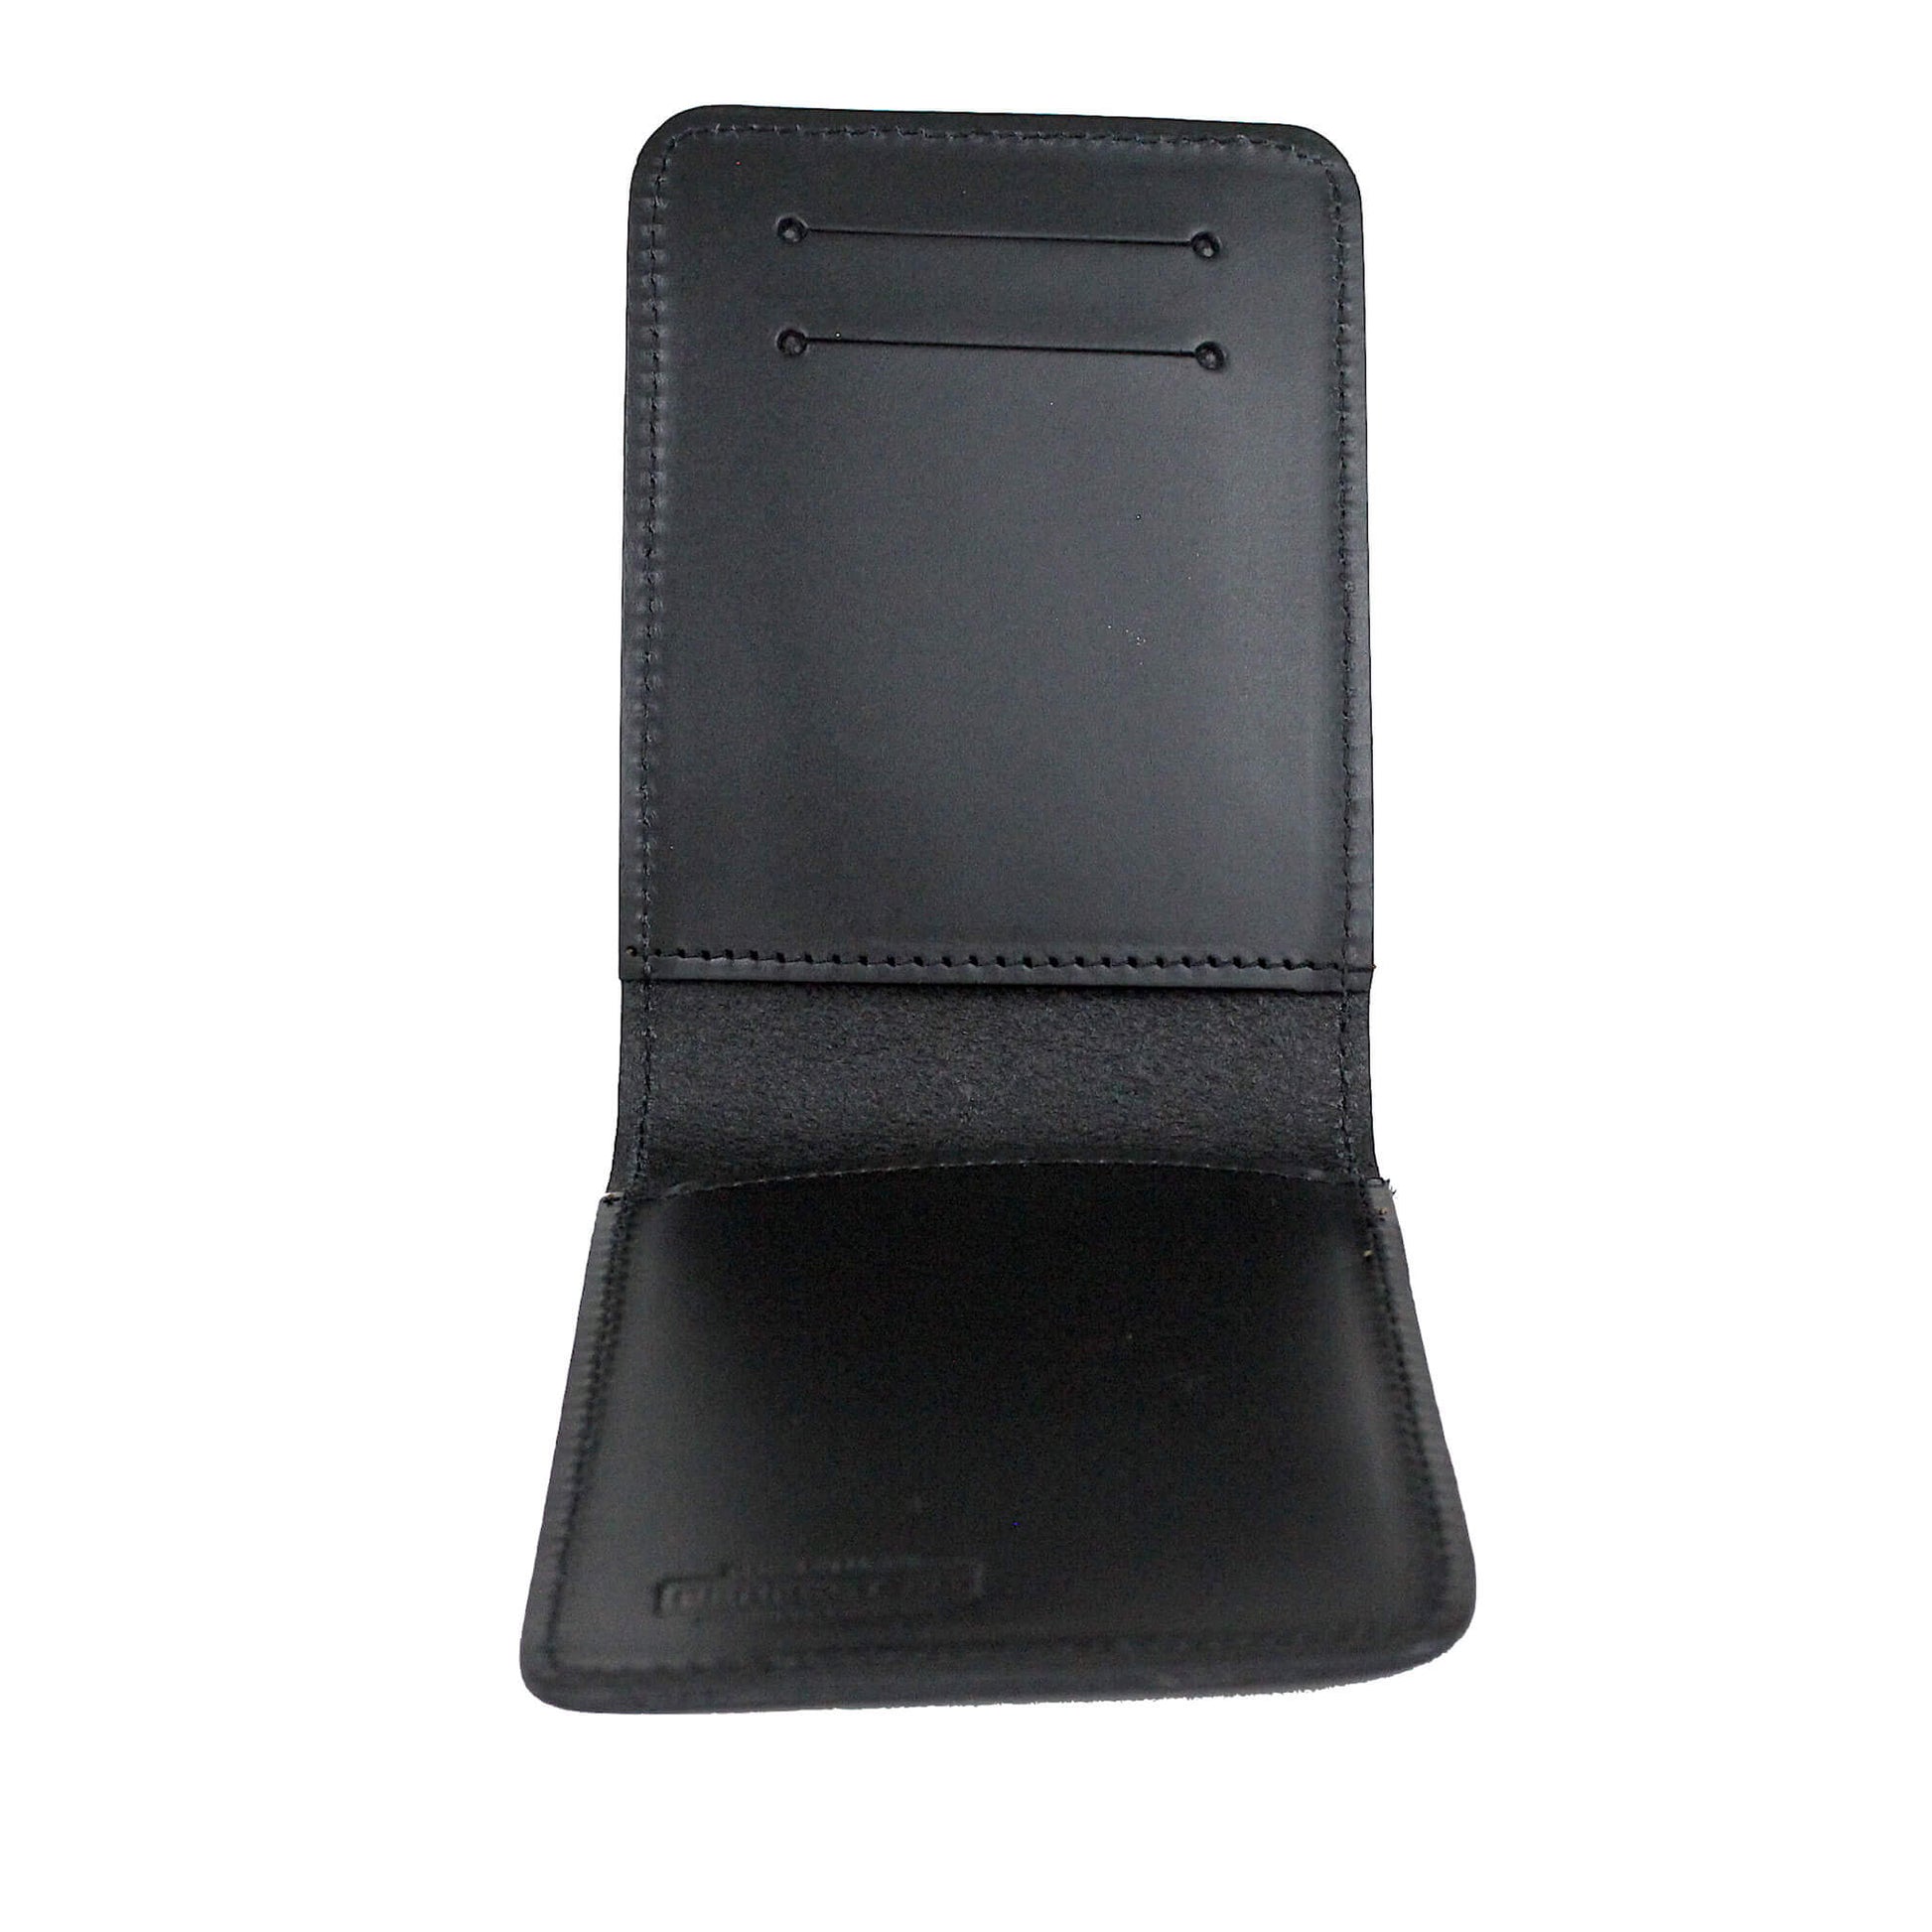 Caledon Fire Notebook Cover-Perfect Fit-911 Duty Gear Canada